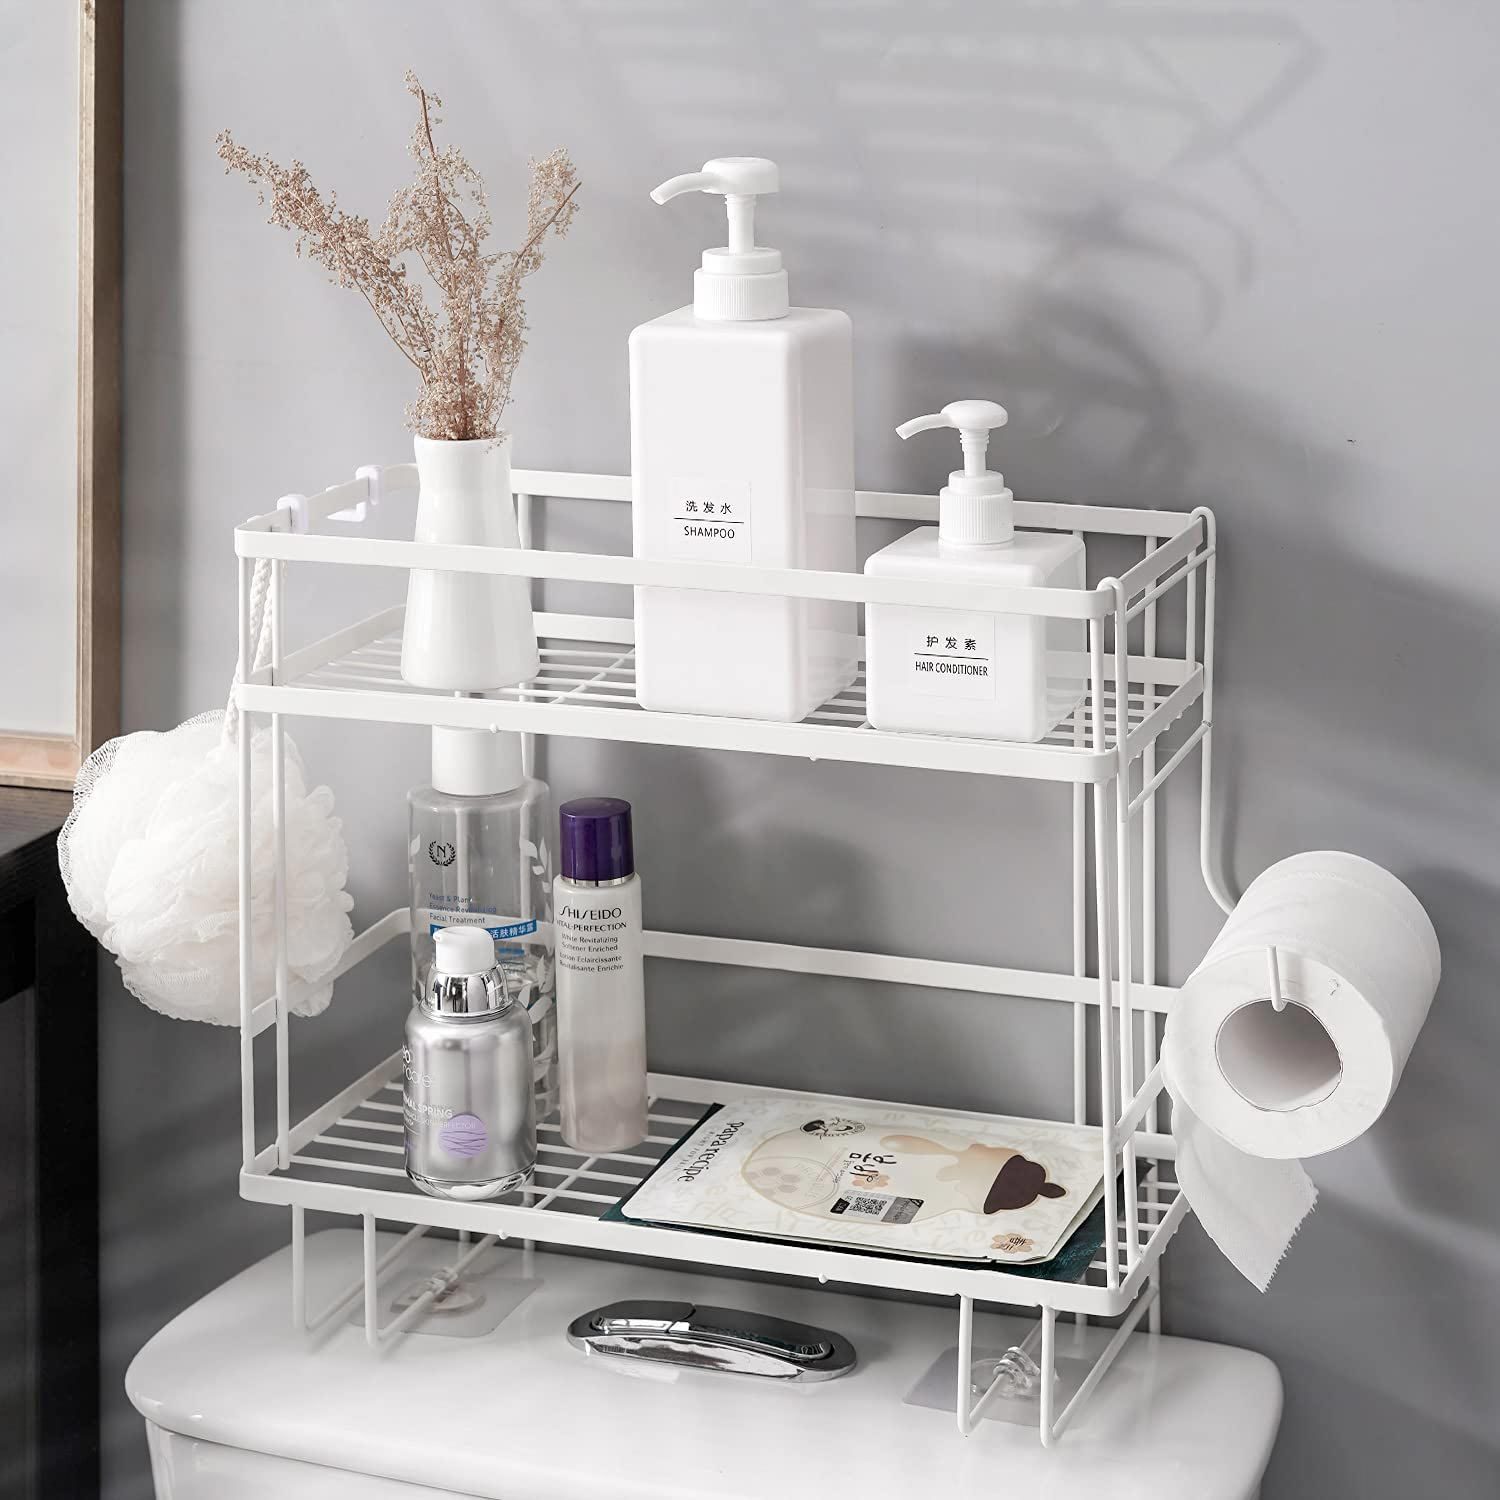 The Best Small-Space Acrylic Bathroom Storage You Can Find on